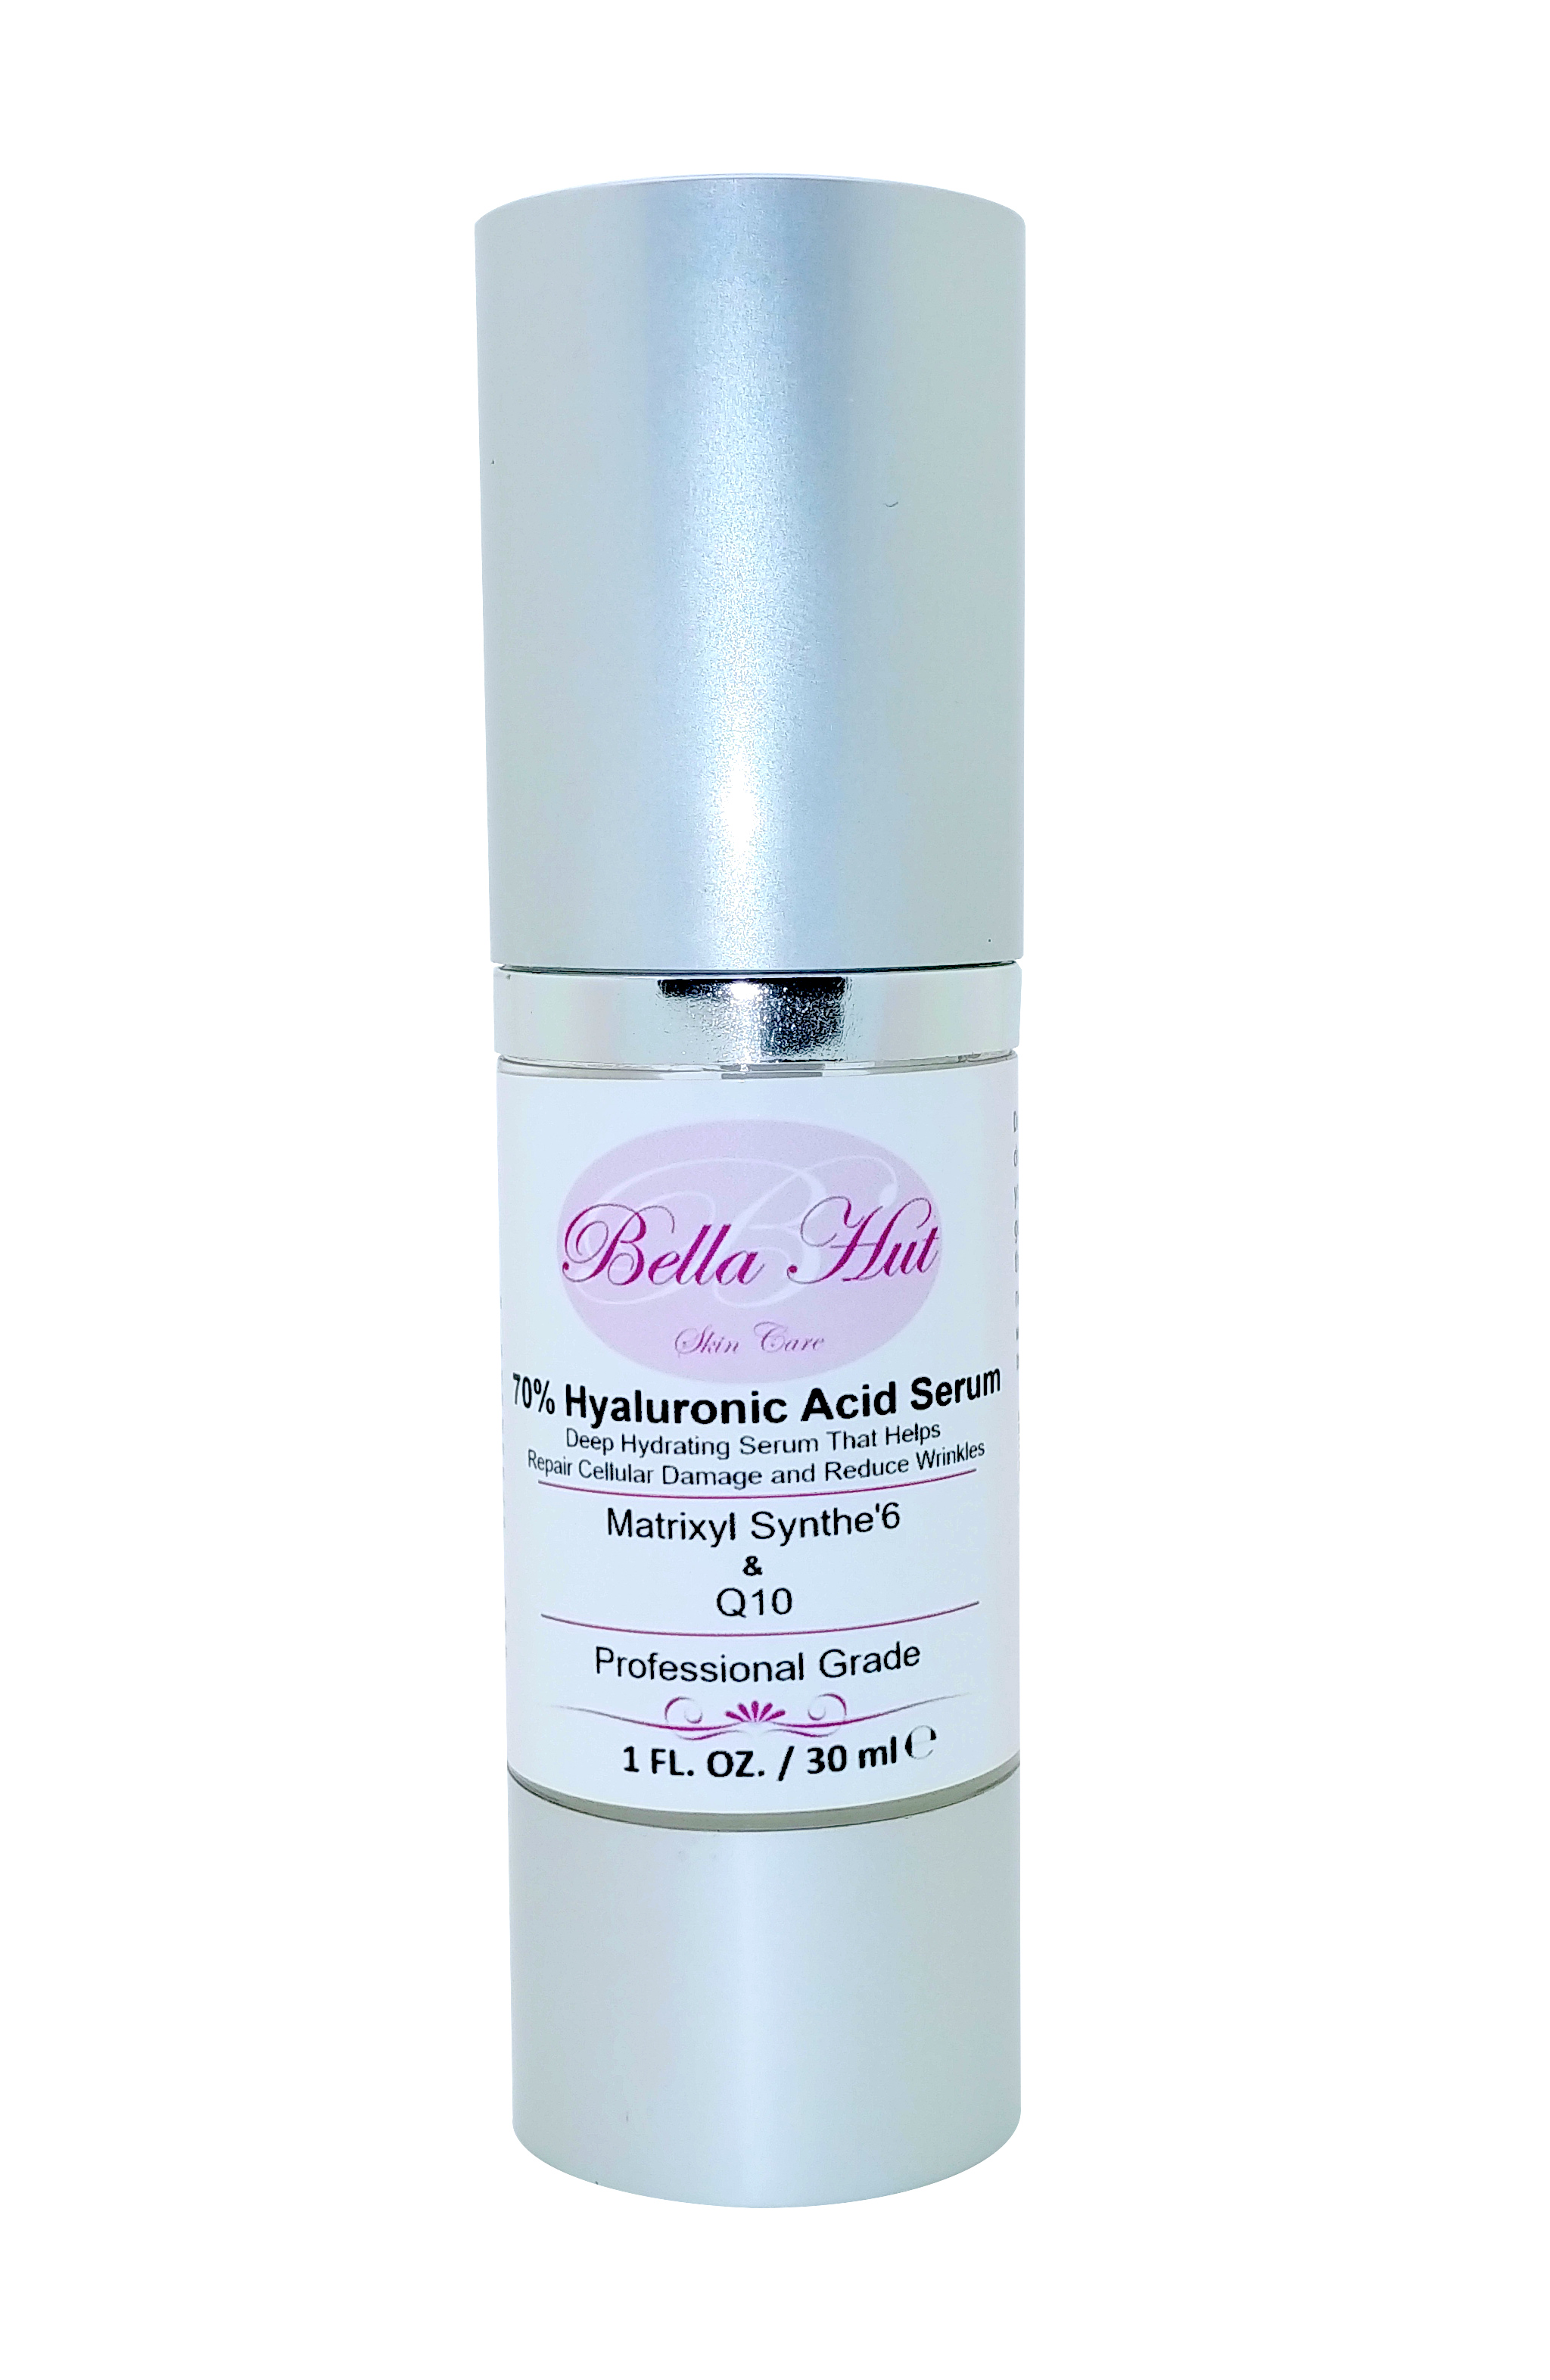 Cellular turnover70% Hyaluronic Acid with With Matrixyl Synthe’6  And Q10 in a deep hydration serum that repairs cell damage